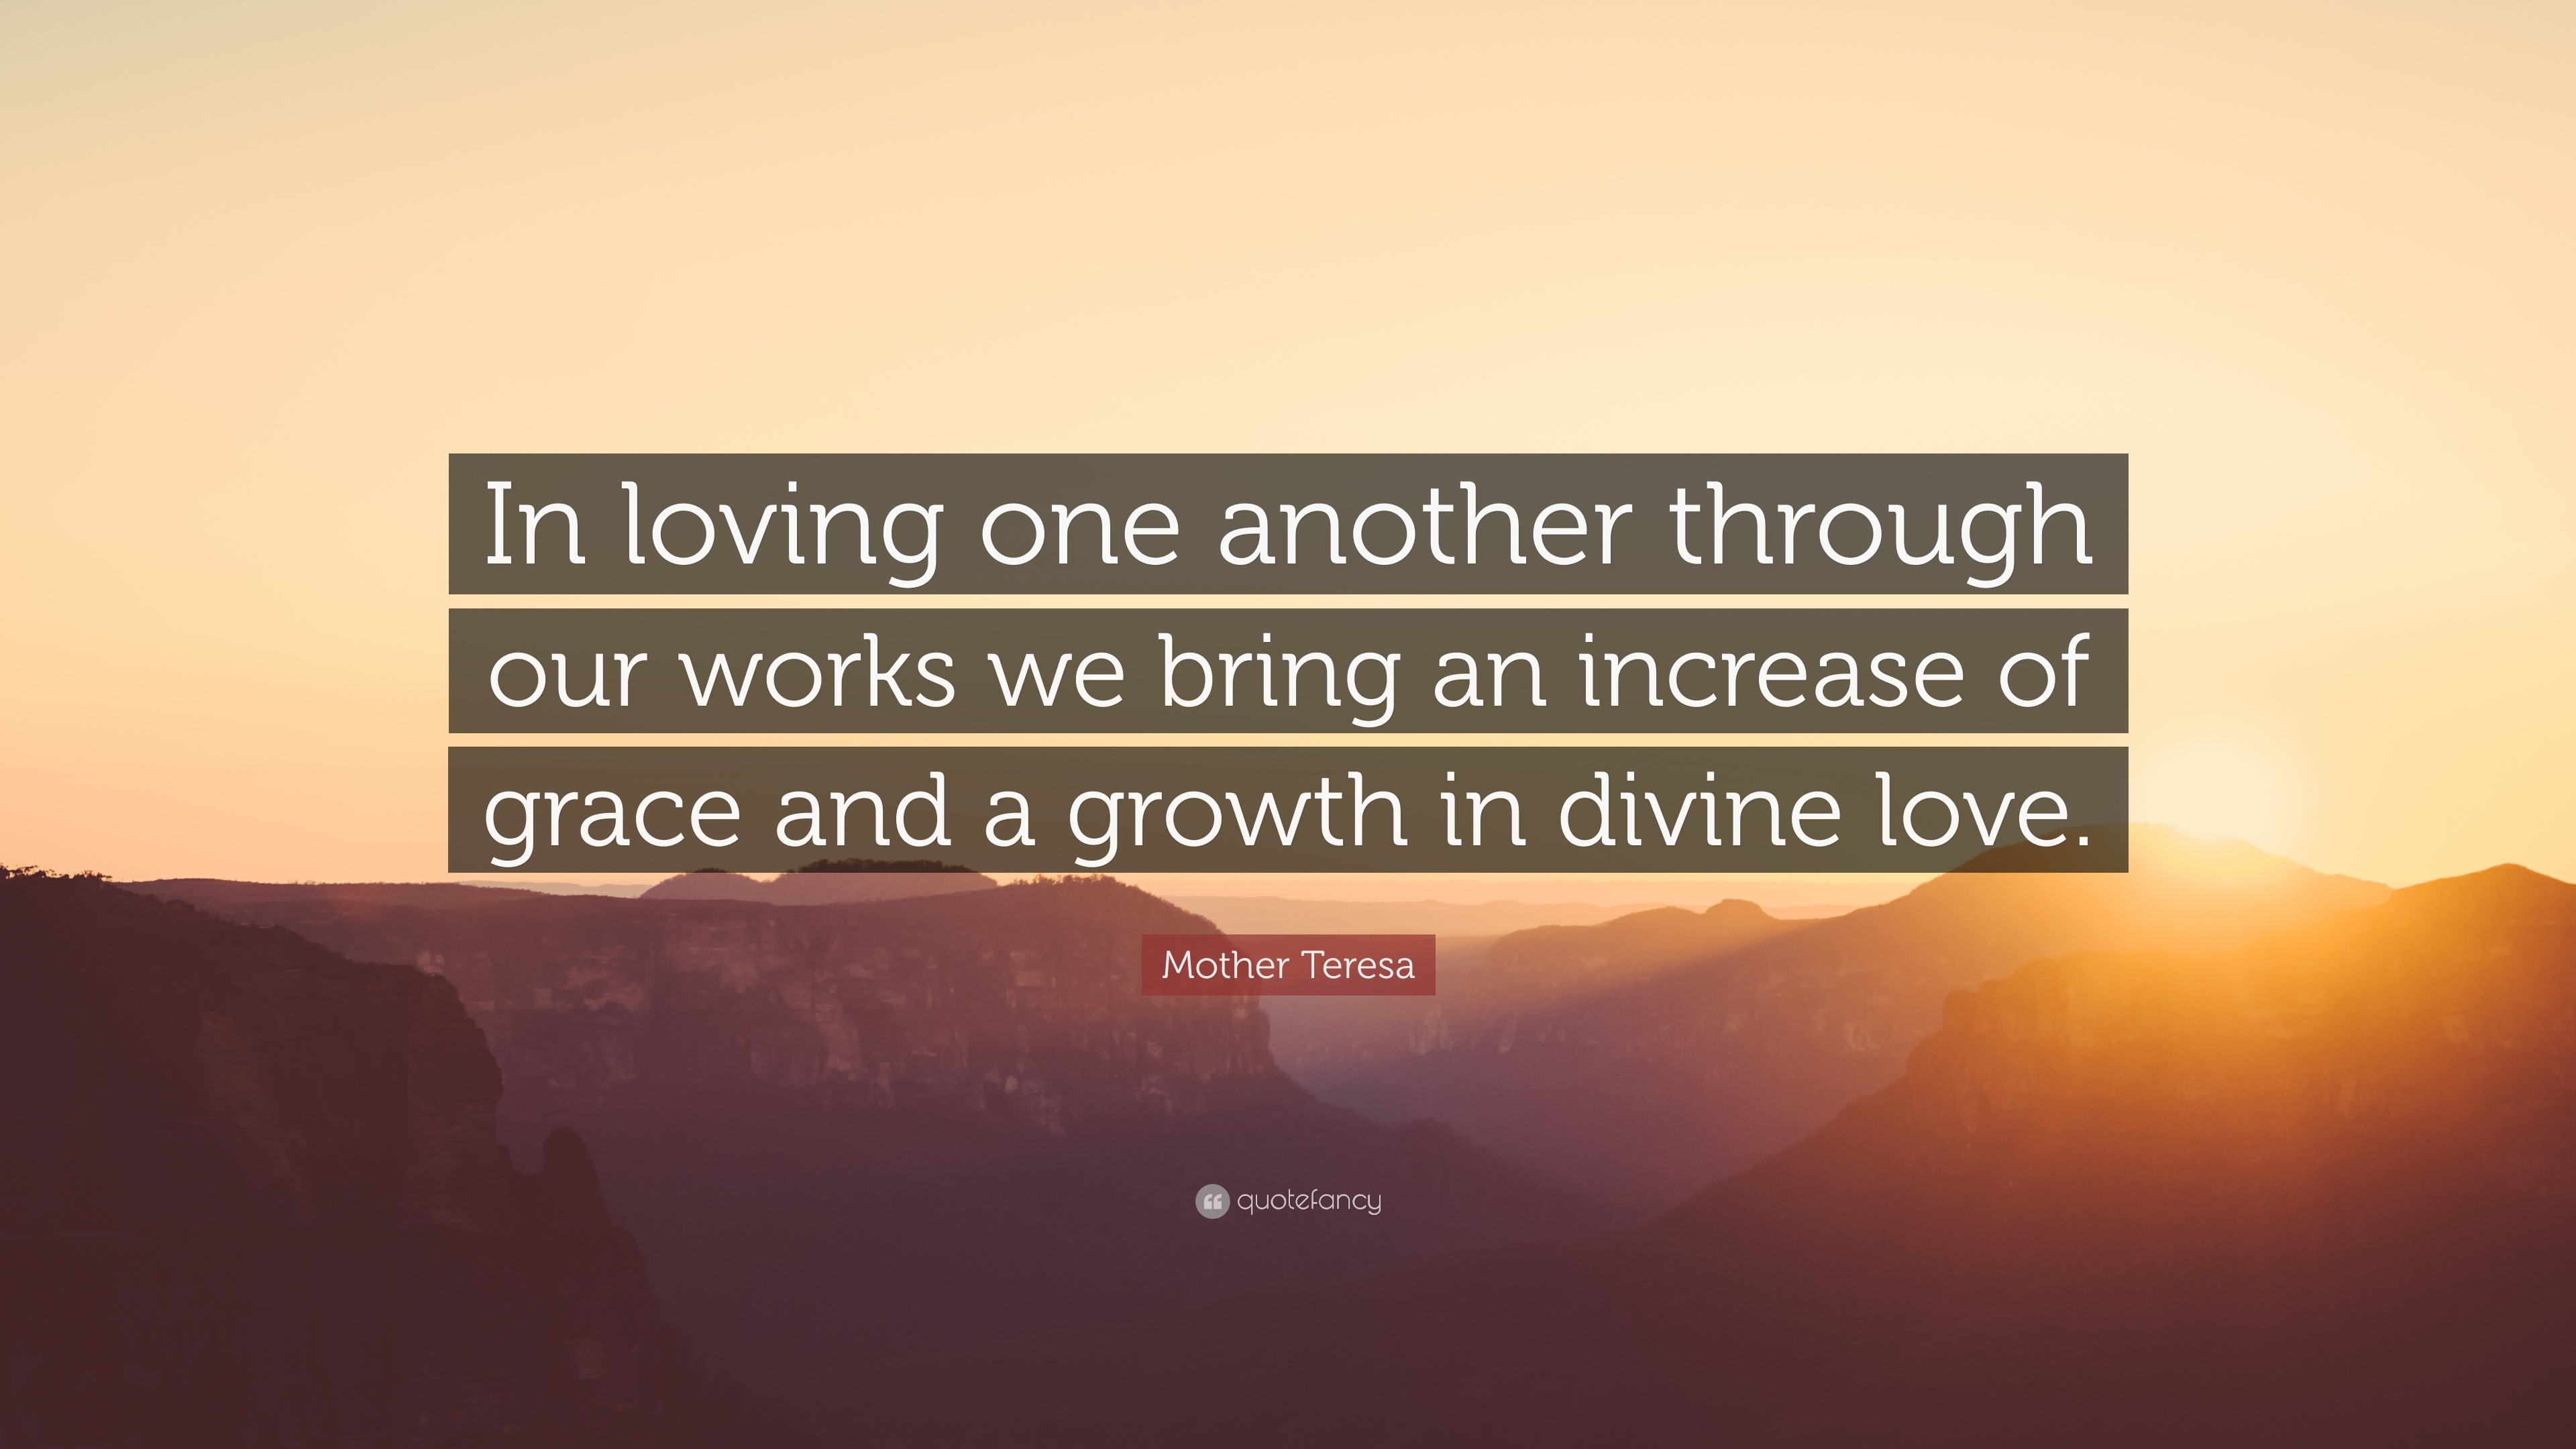 Mother Teresa Quote “In loving one another through our works we bring an increase